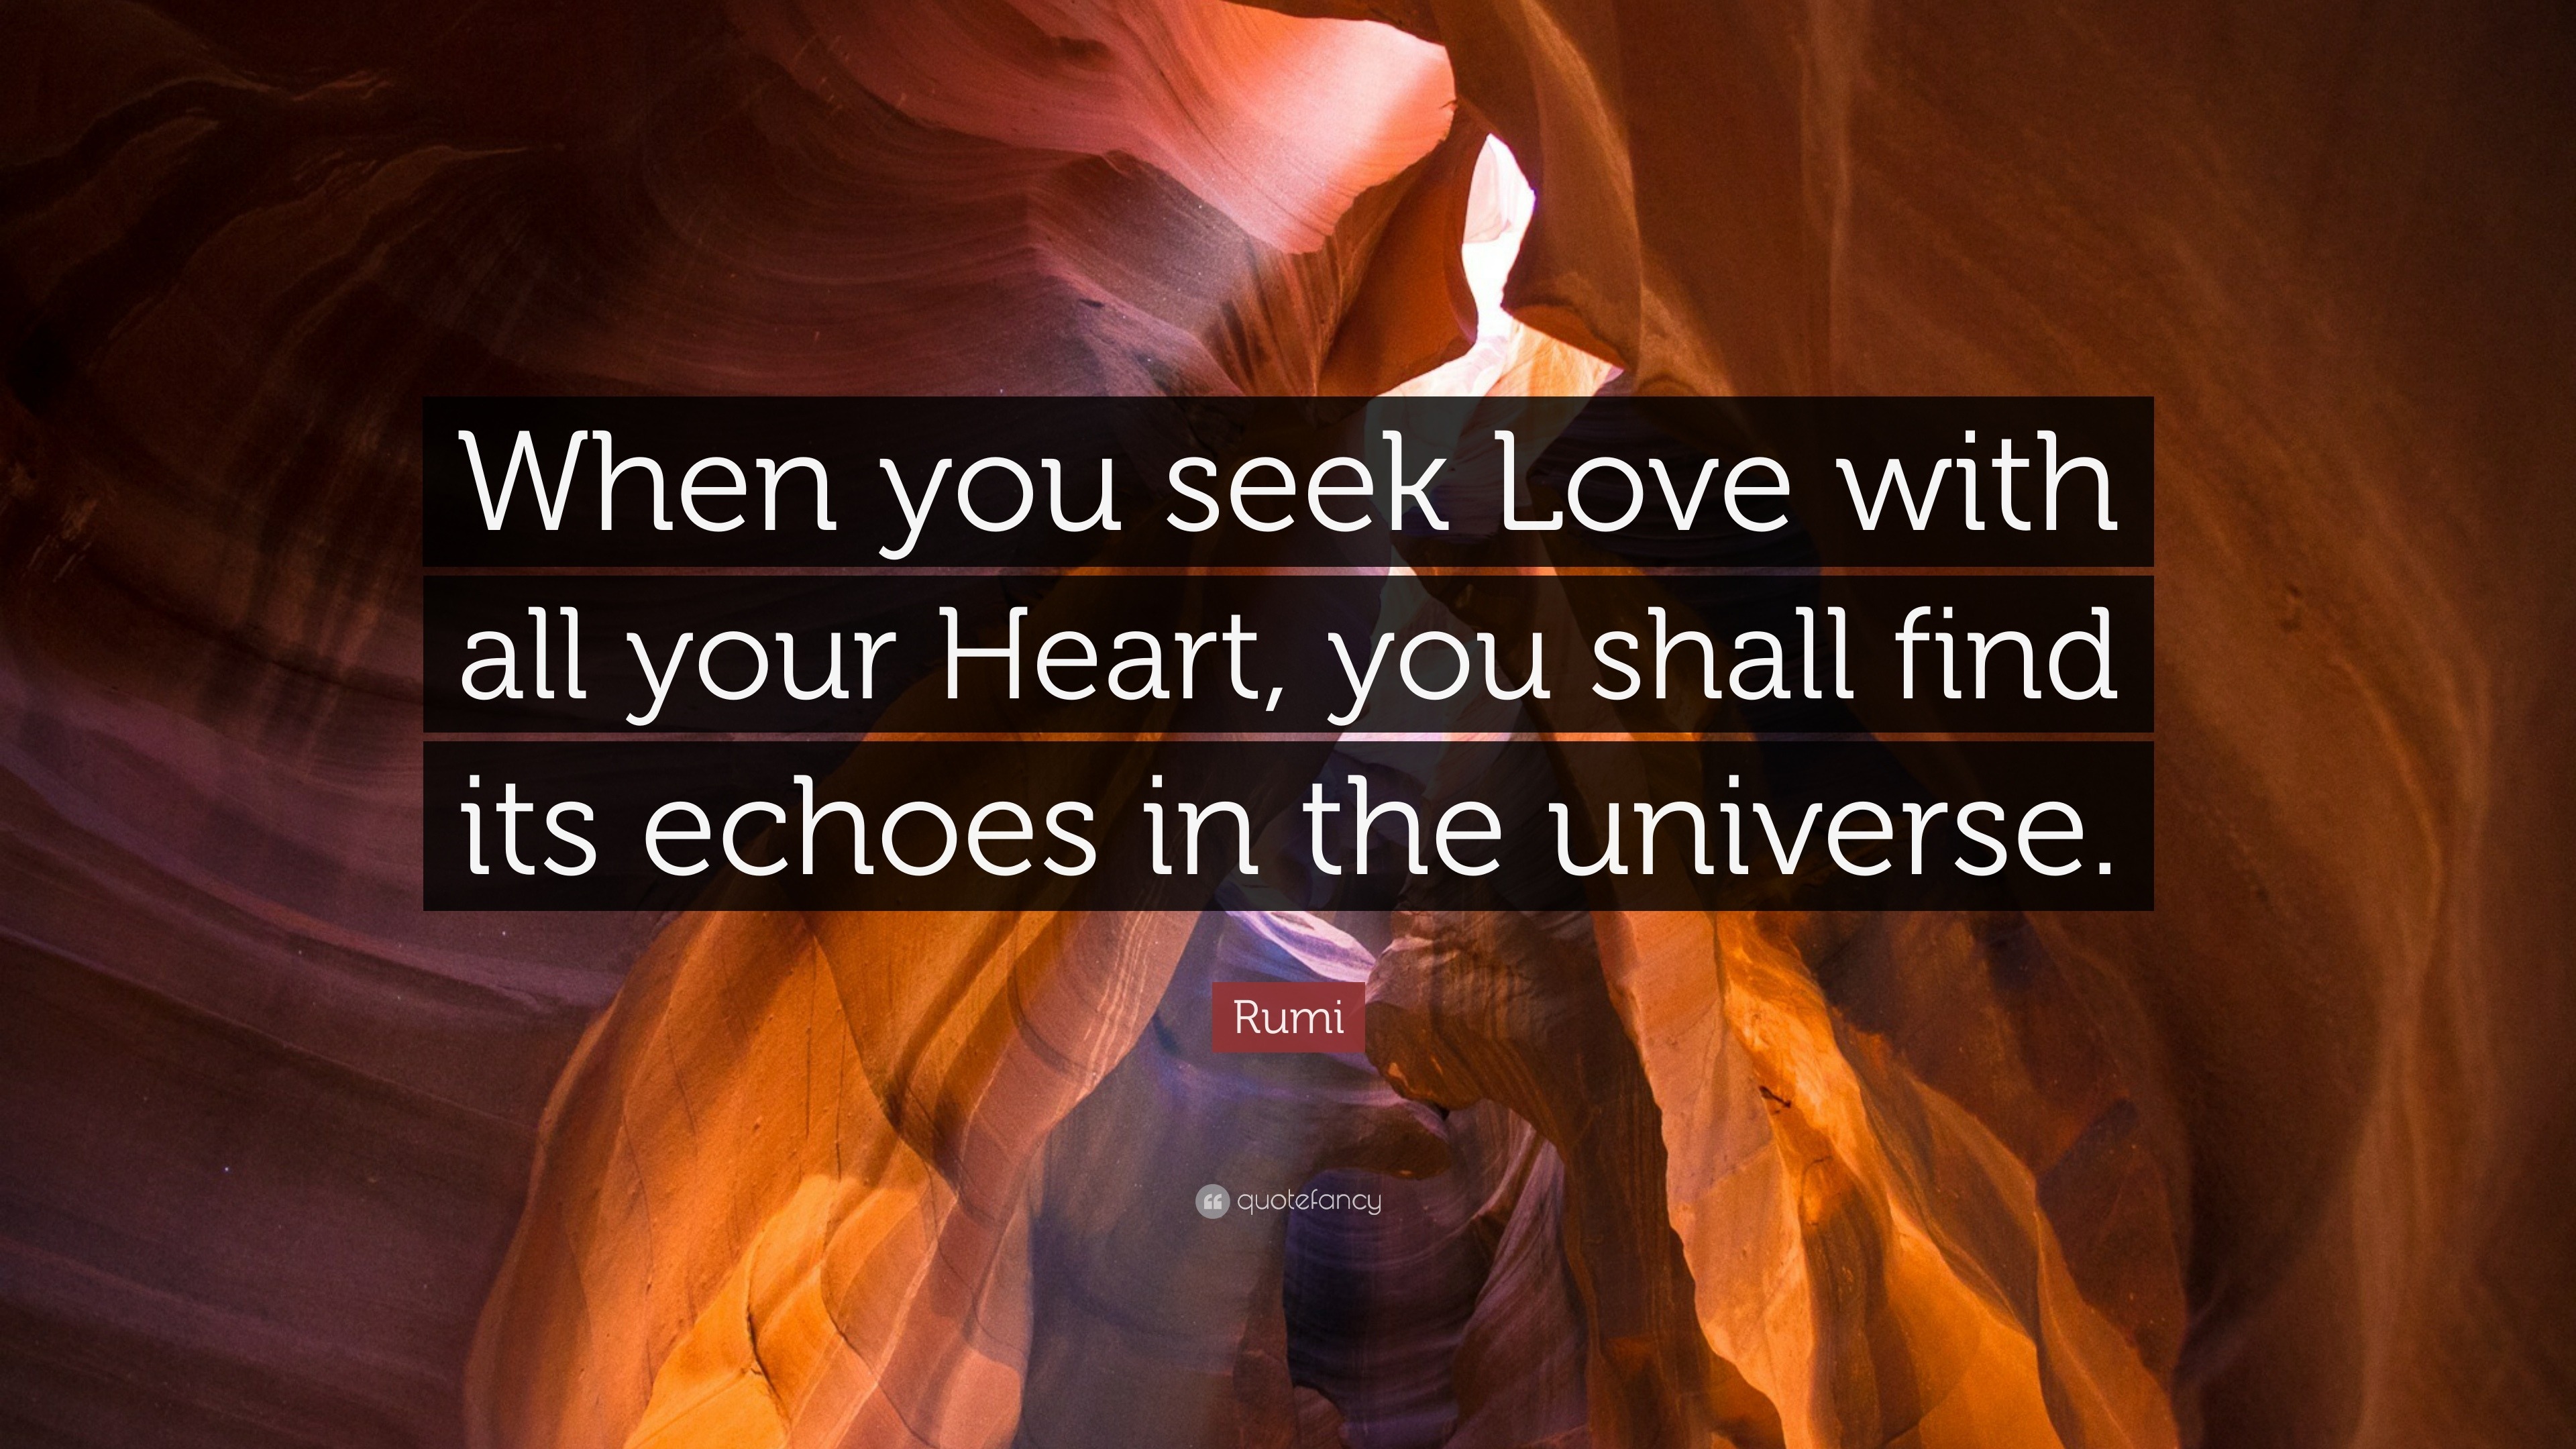 Rumi Quote “When you seek Love with all your Heart you shall find